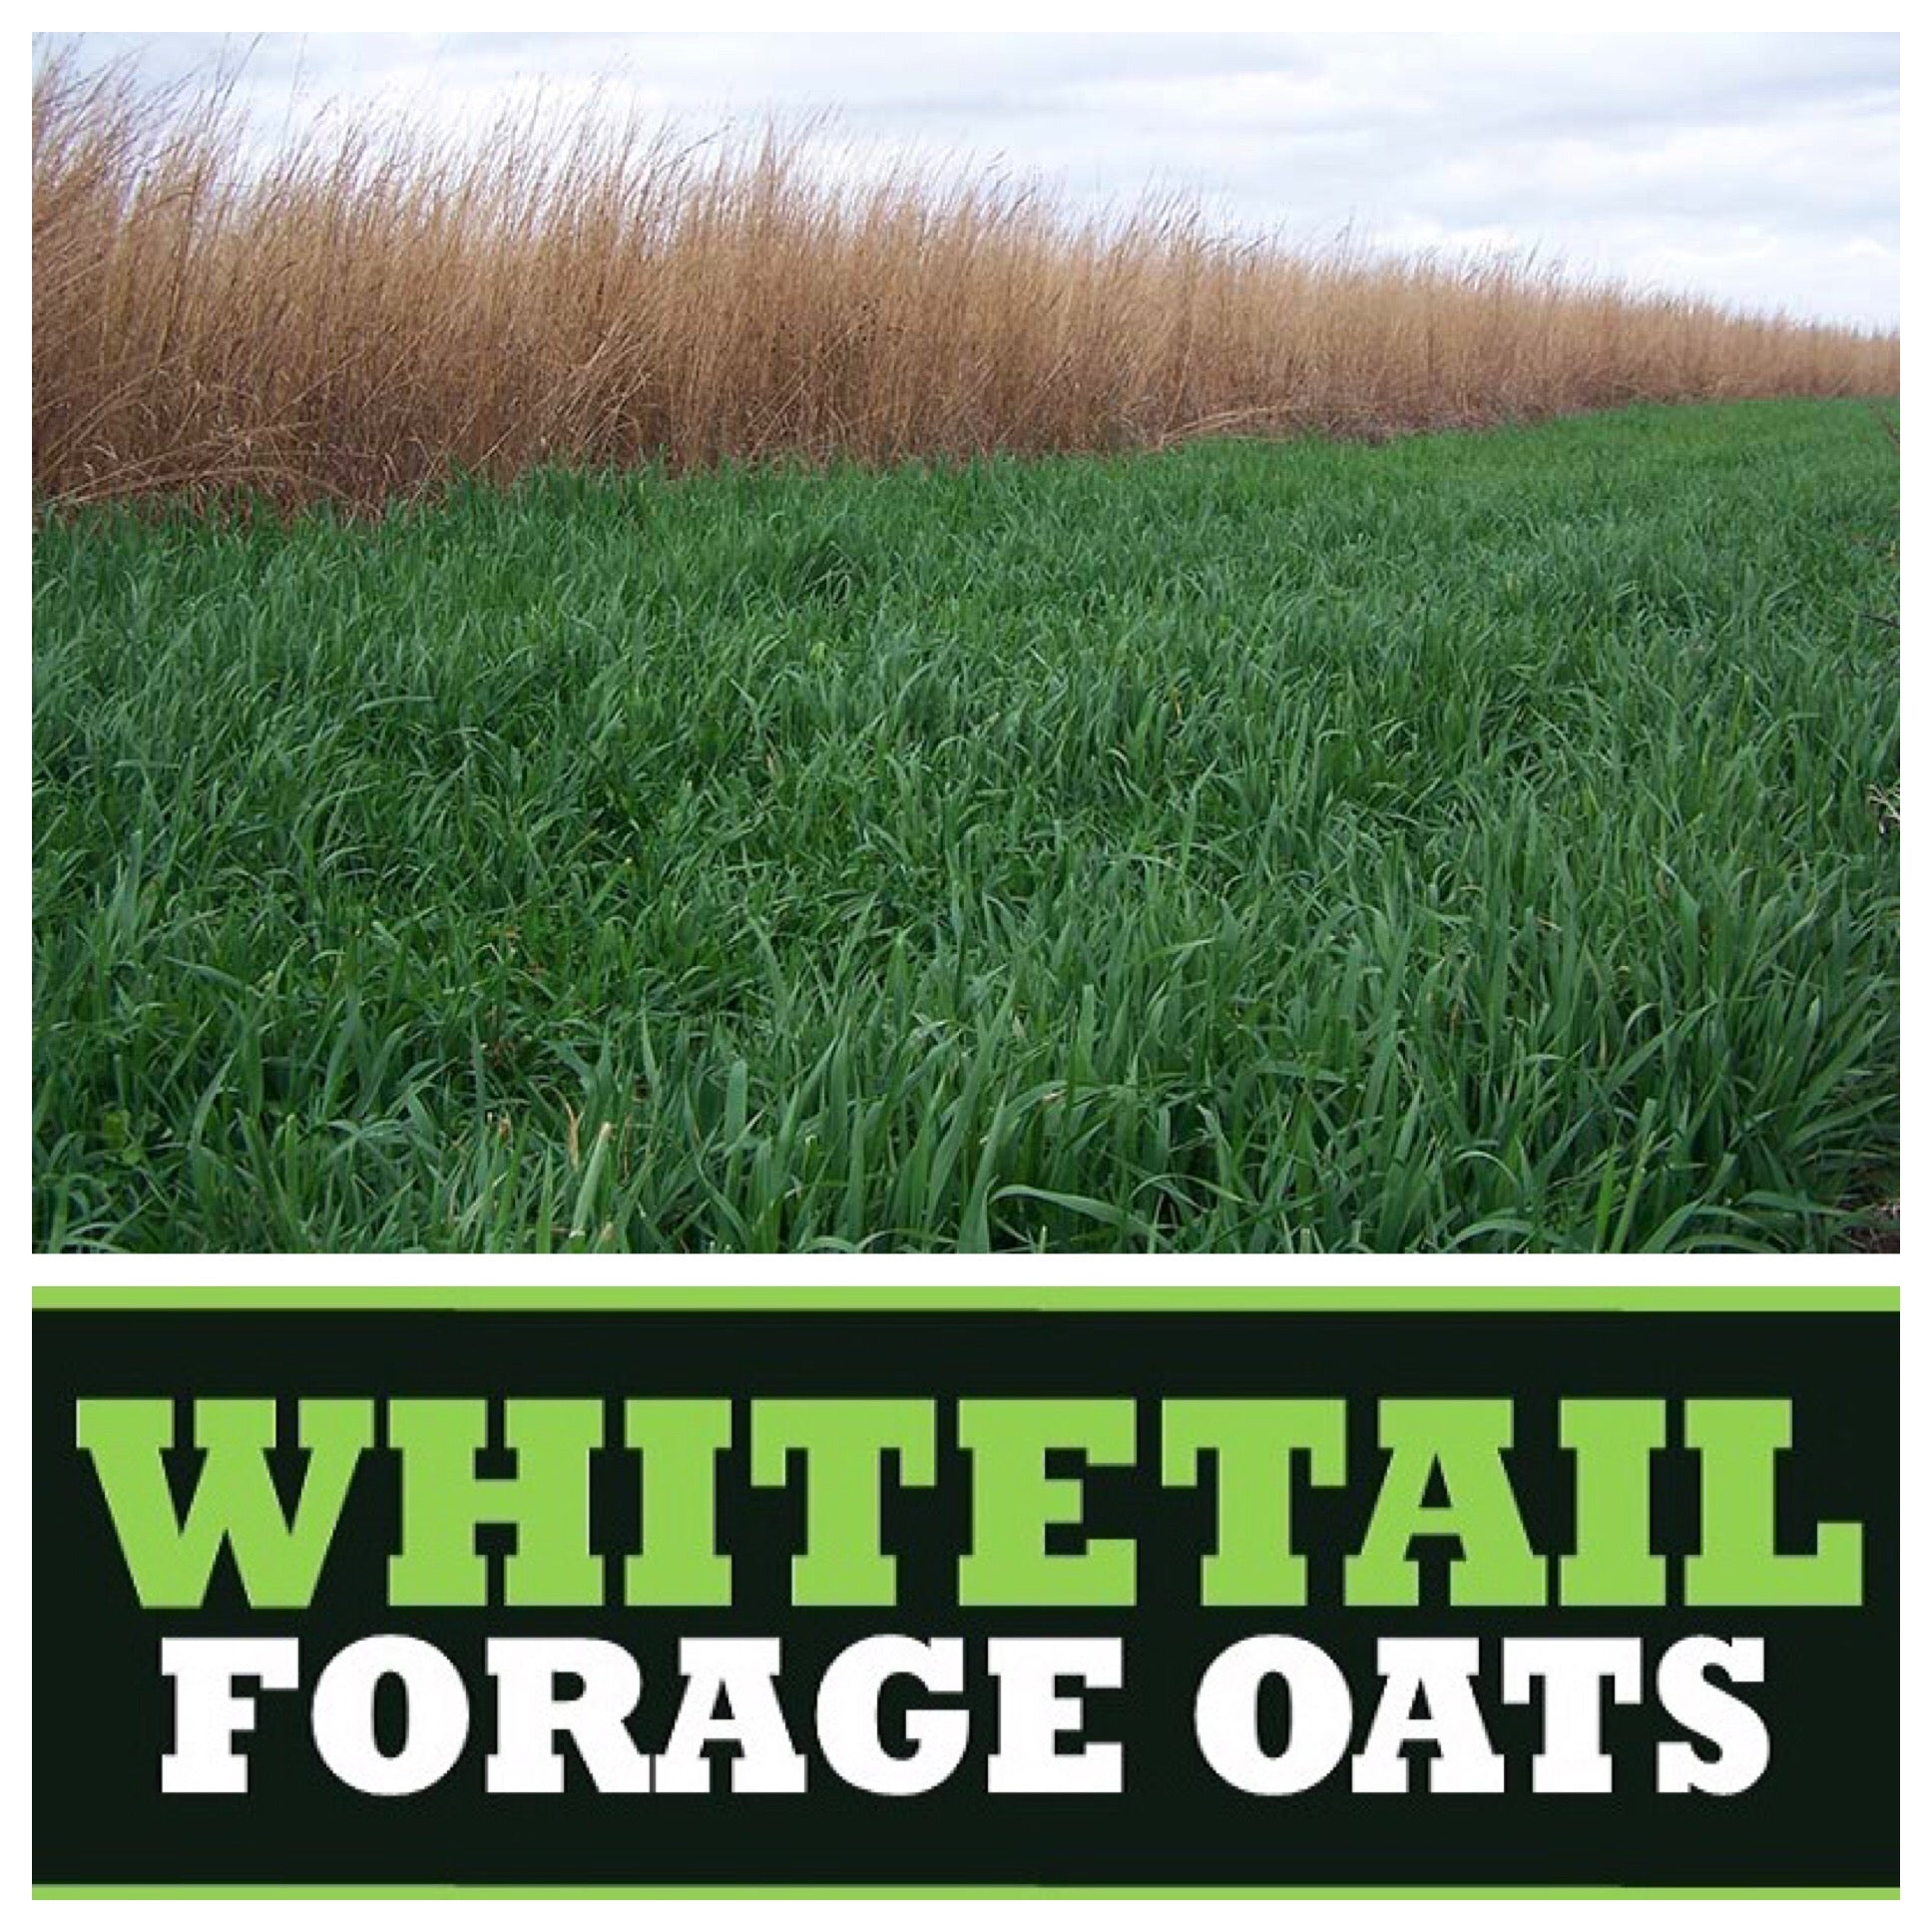 realworld wildlife products whitetail forage oats food plot